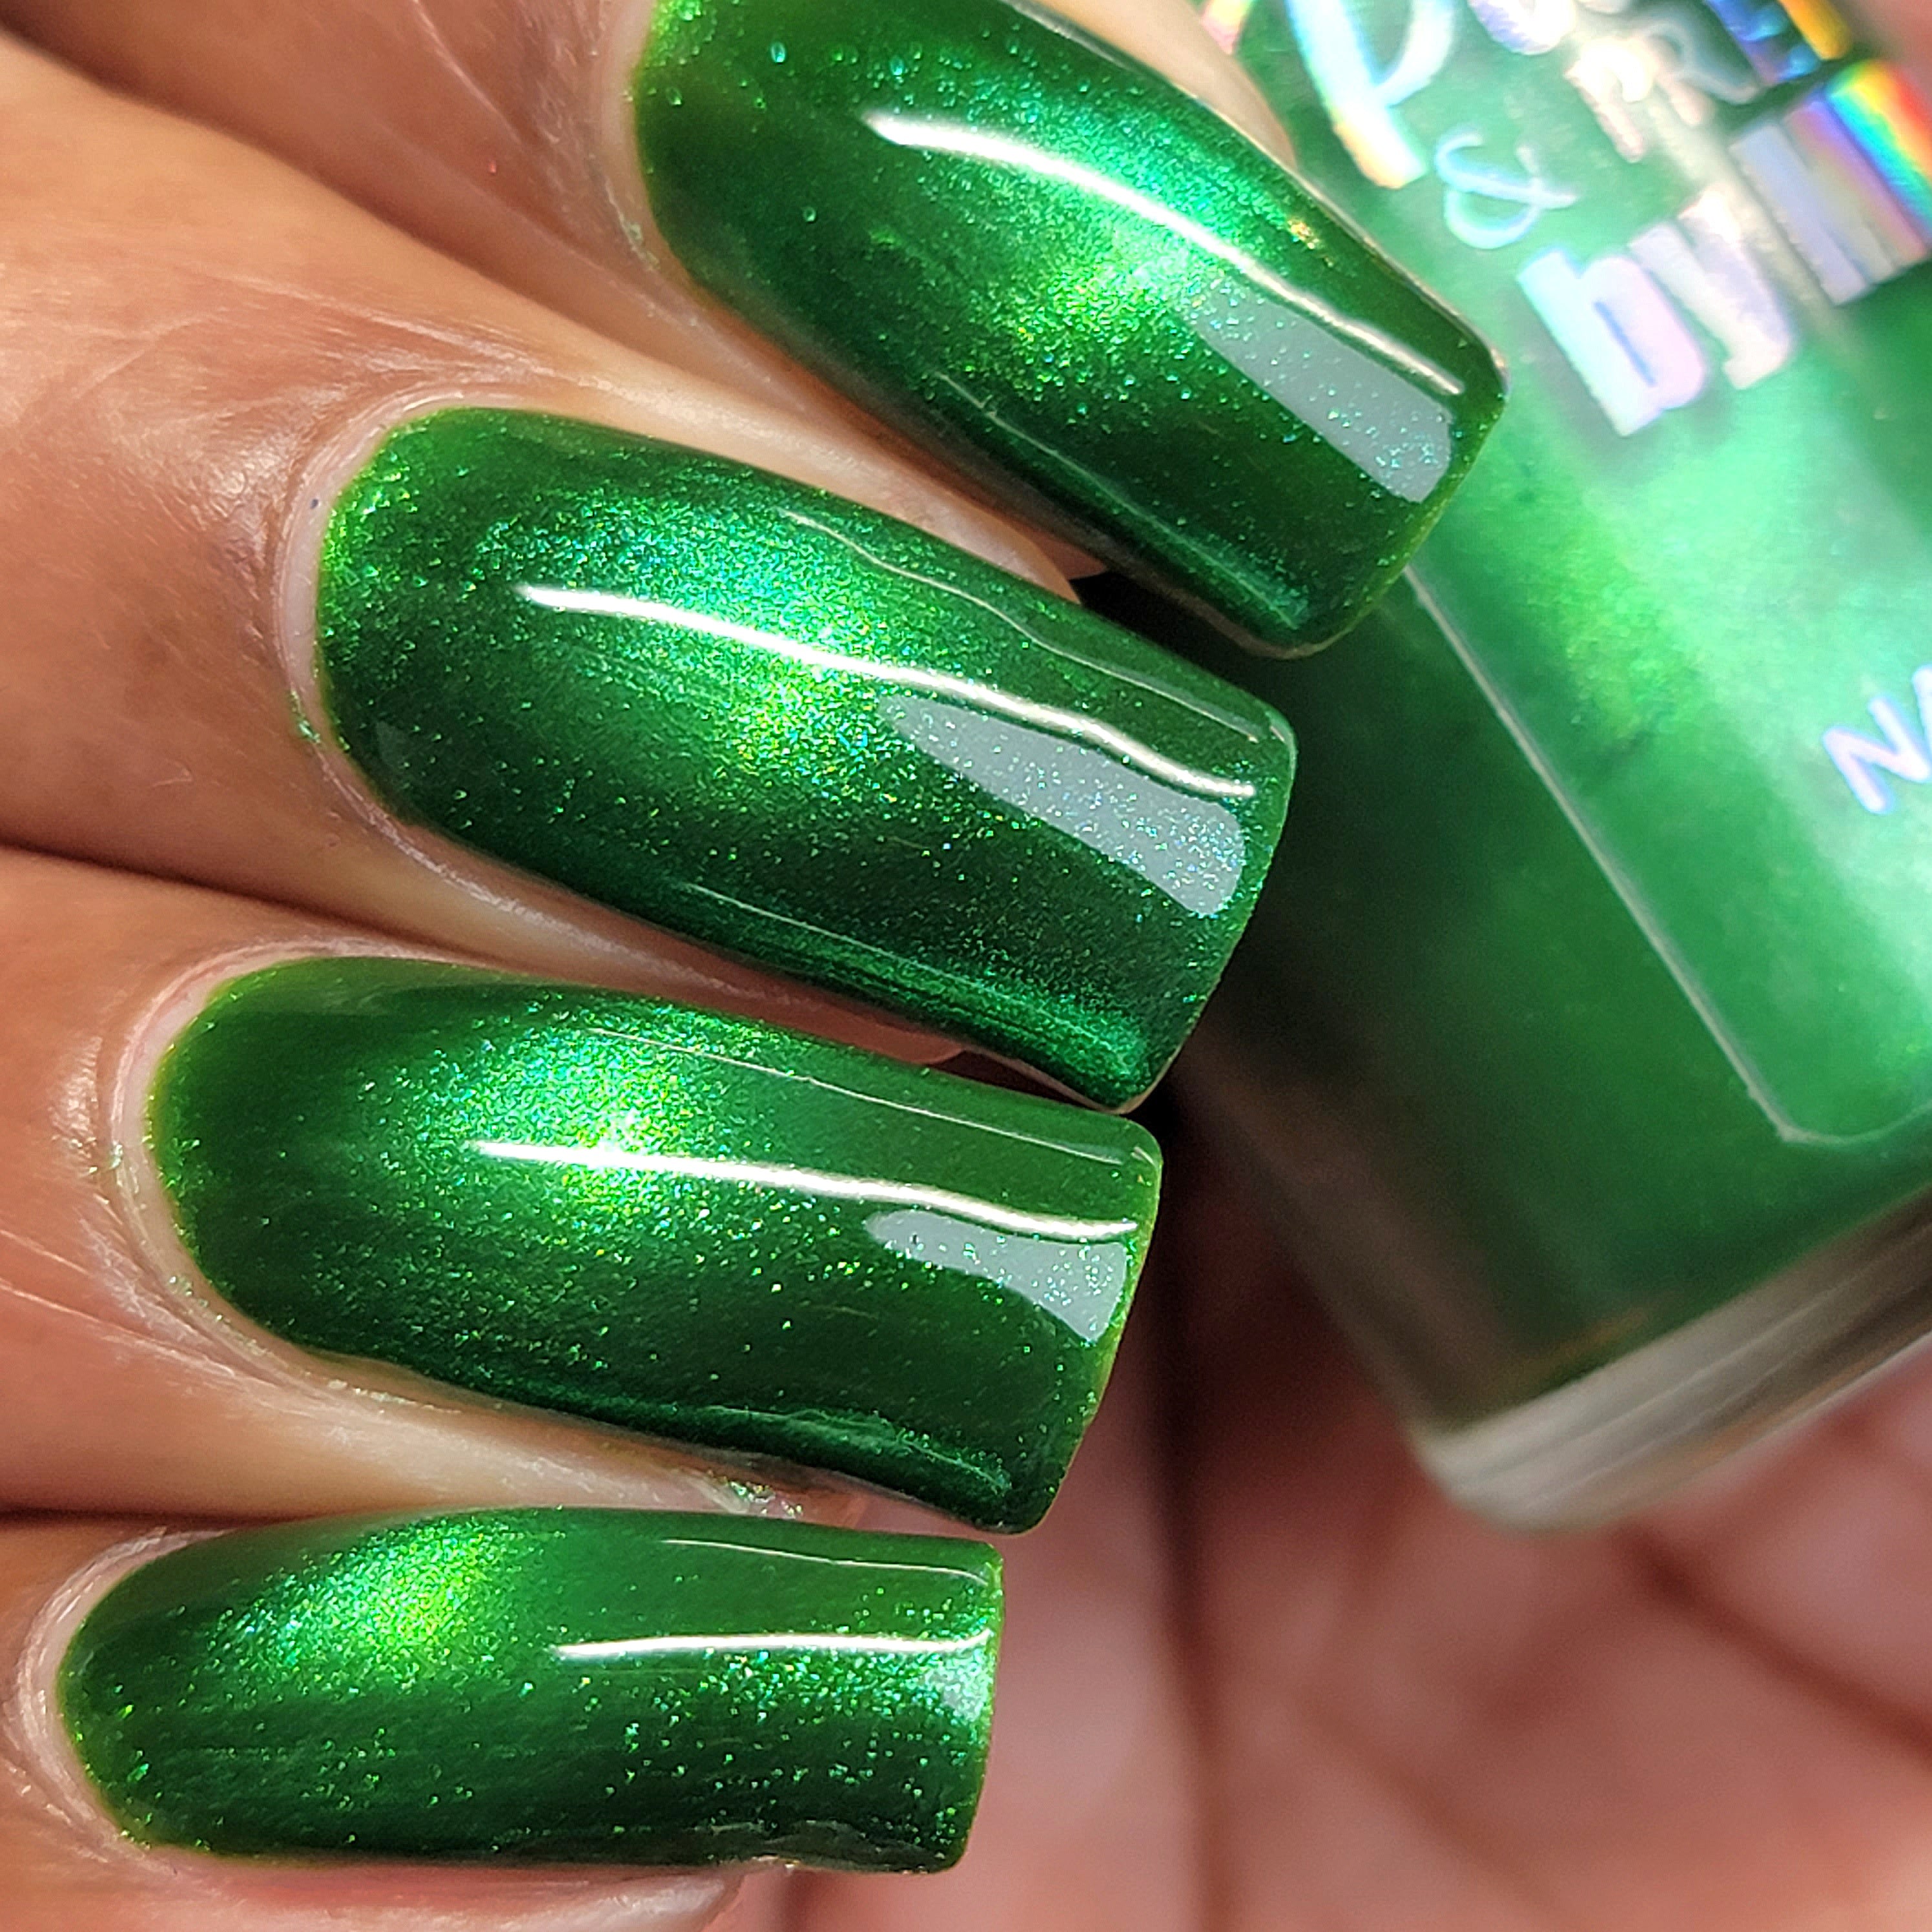 Why does teal/emerald green nail polish look so good but red doesn't seem  to work as well? : r/OliveMUA